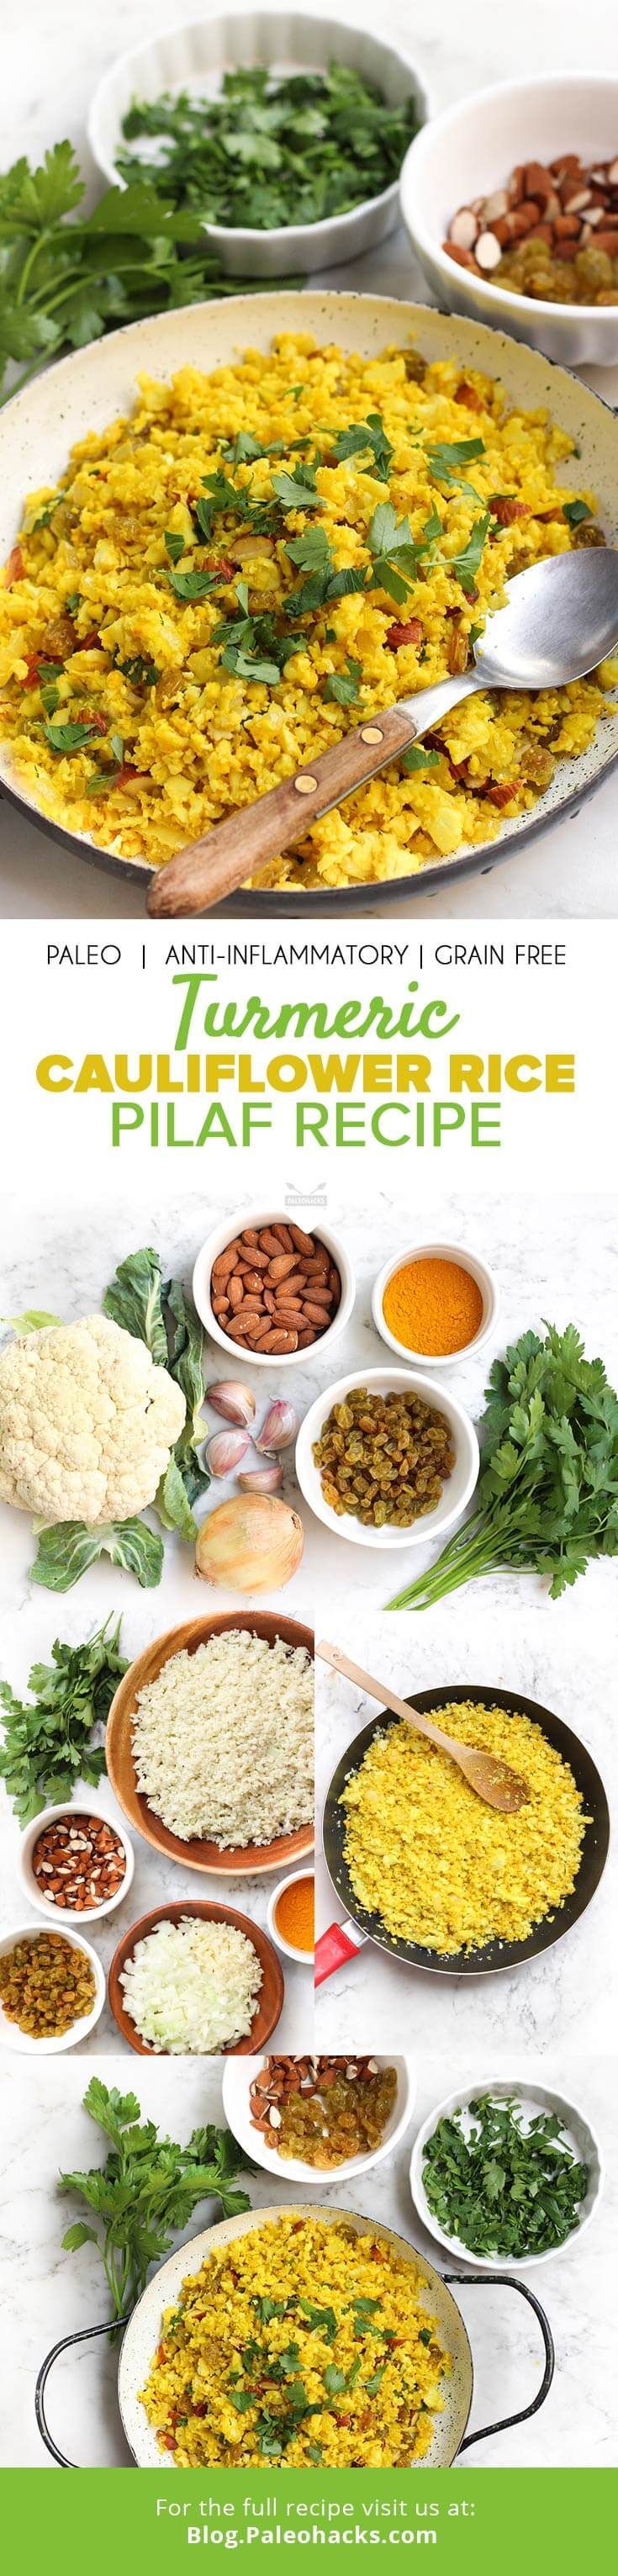 This Paleo pilaf swaps out traditional rice with healthy cauliflower spiced with anti-inflammatory turmeric! Get the recipe here: